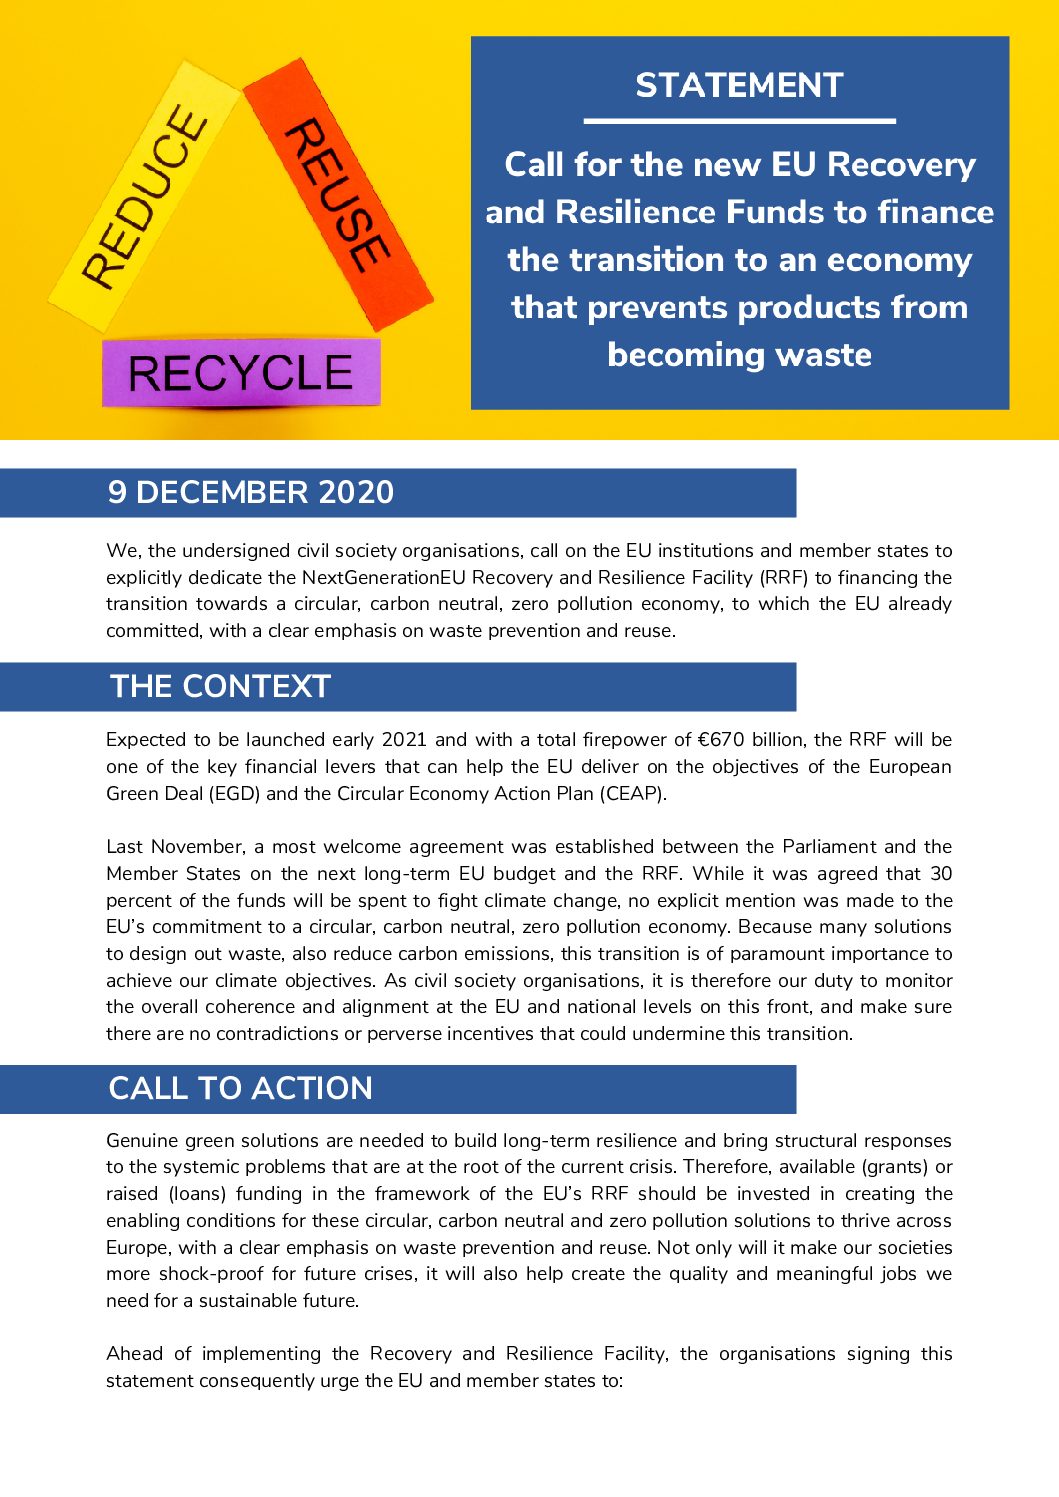 Call for the new EU Recovery and Resilience Funds to finance the transition to an economy that prevents products from becoming waste